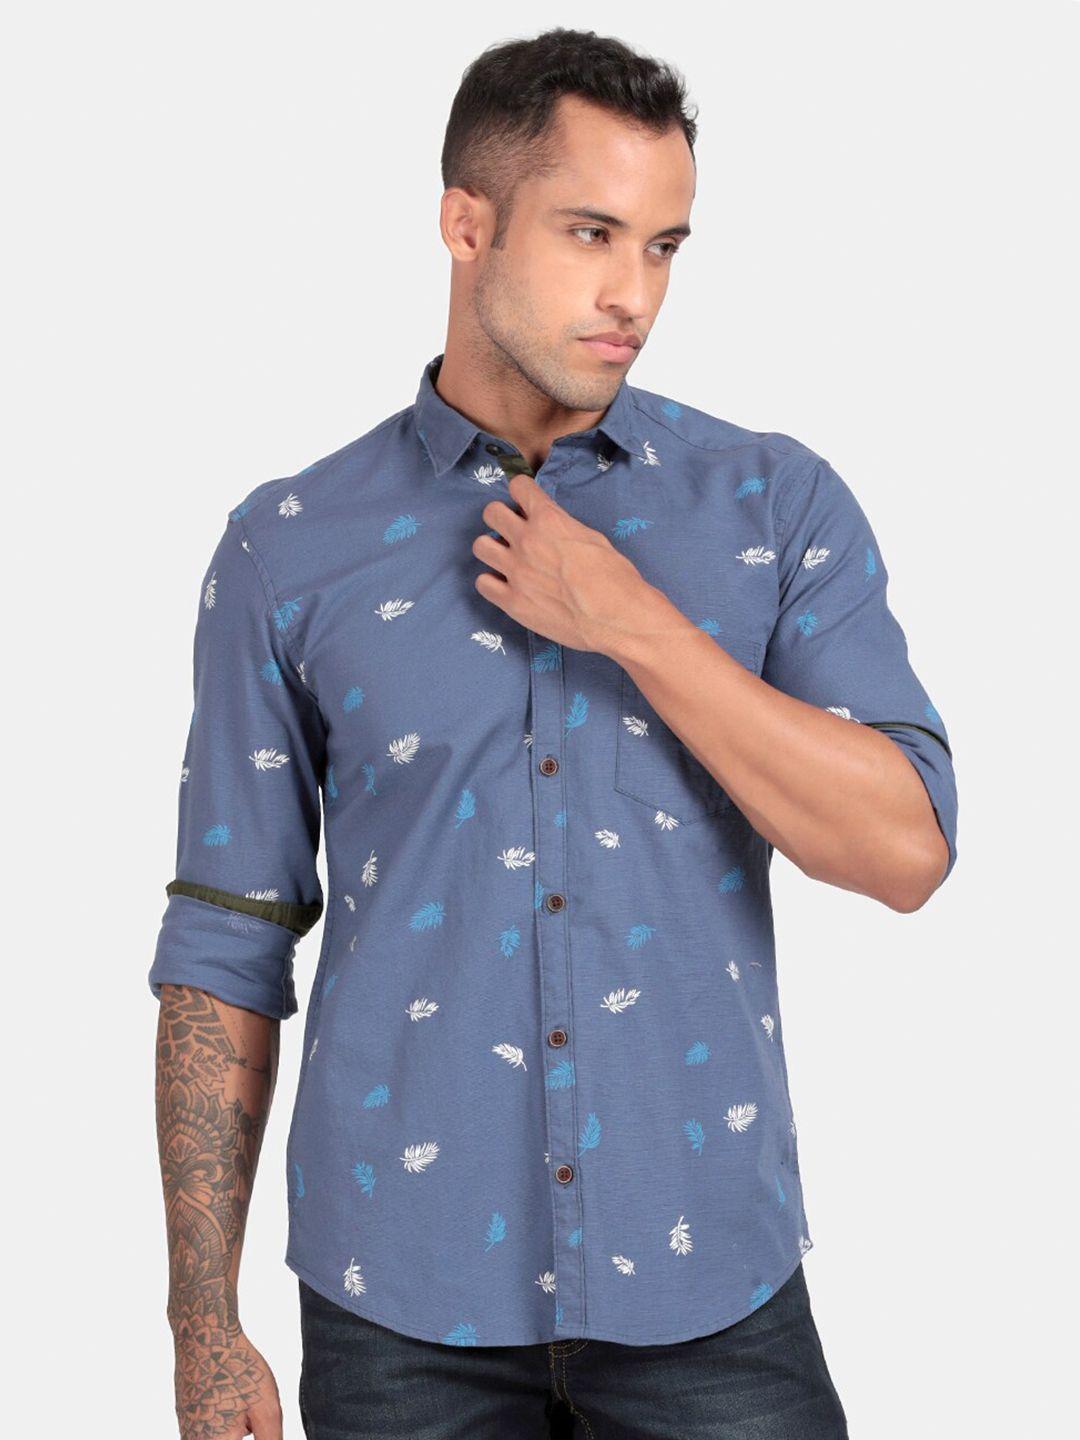 rug woods comfort printed cotton casual shirt